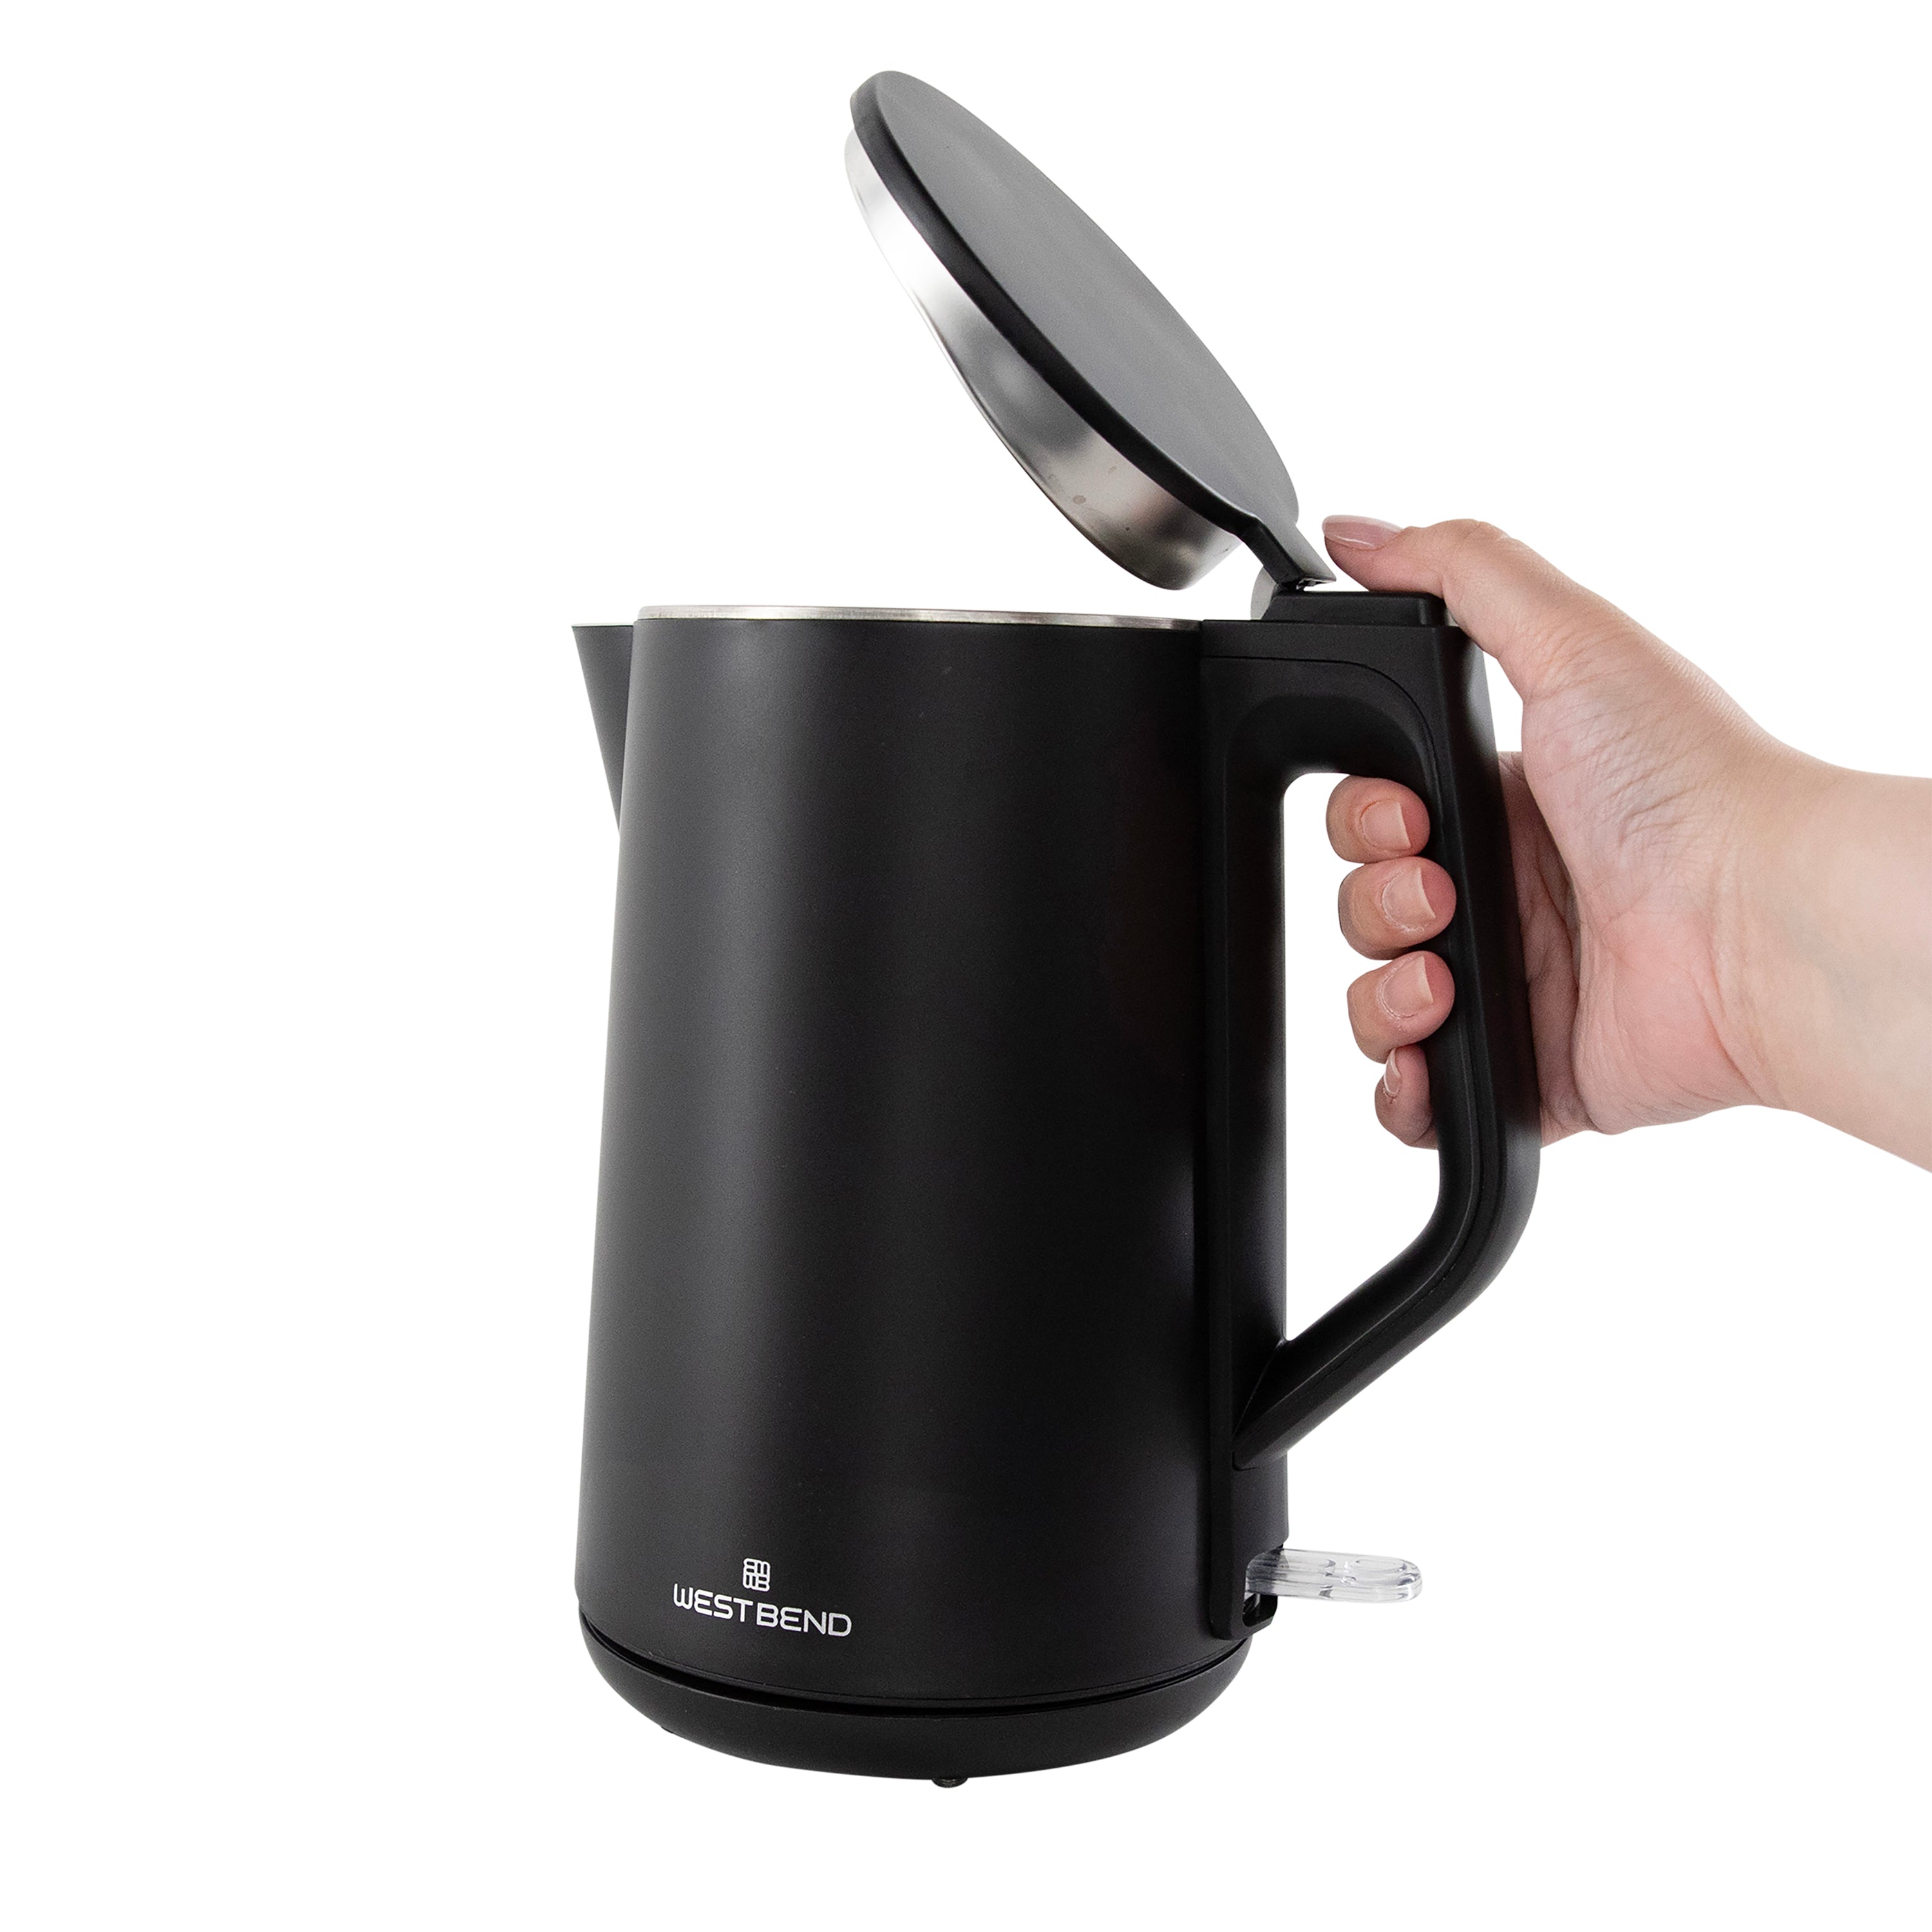 West Bend Retro-Style Electric Kettle, 1.7 Liter Capacity, 1500 W, In Gray  KTWBRTGR13 - The Home Depot